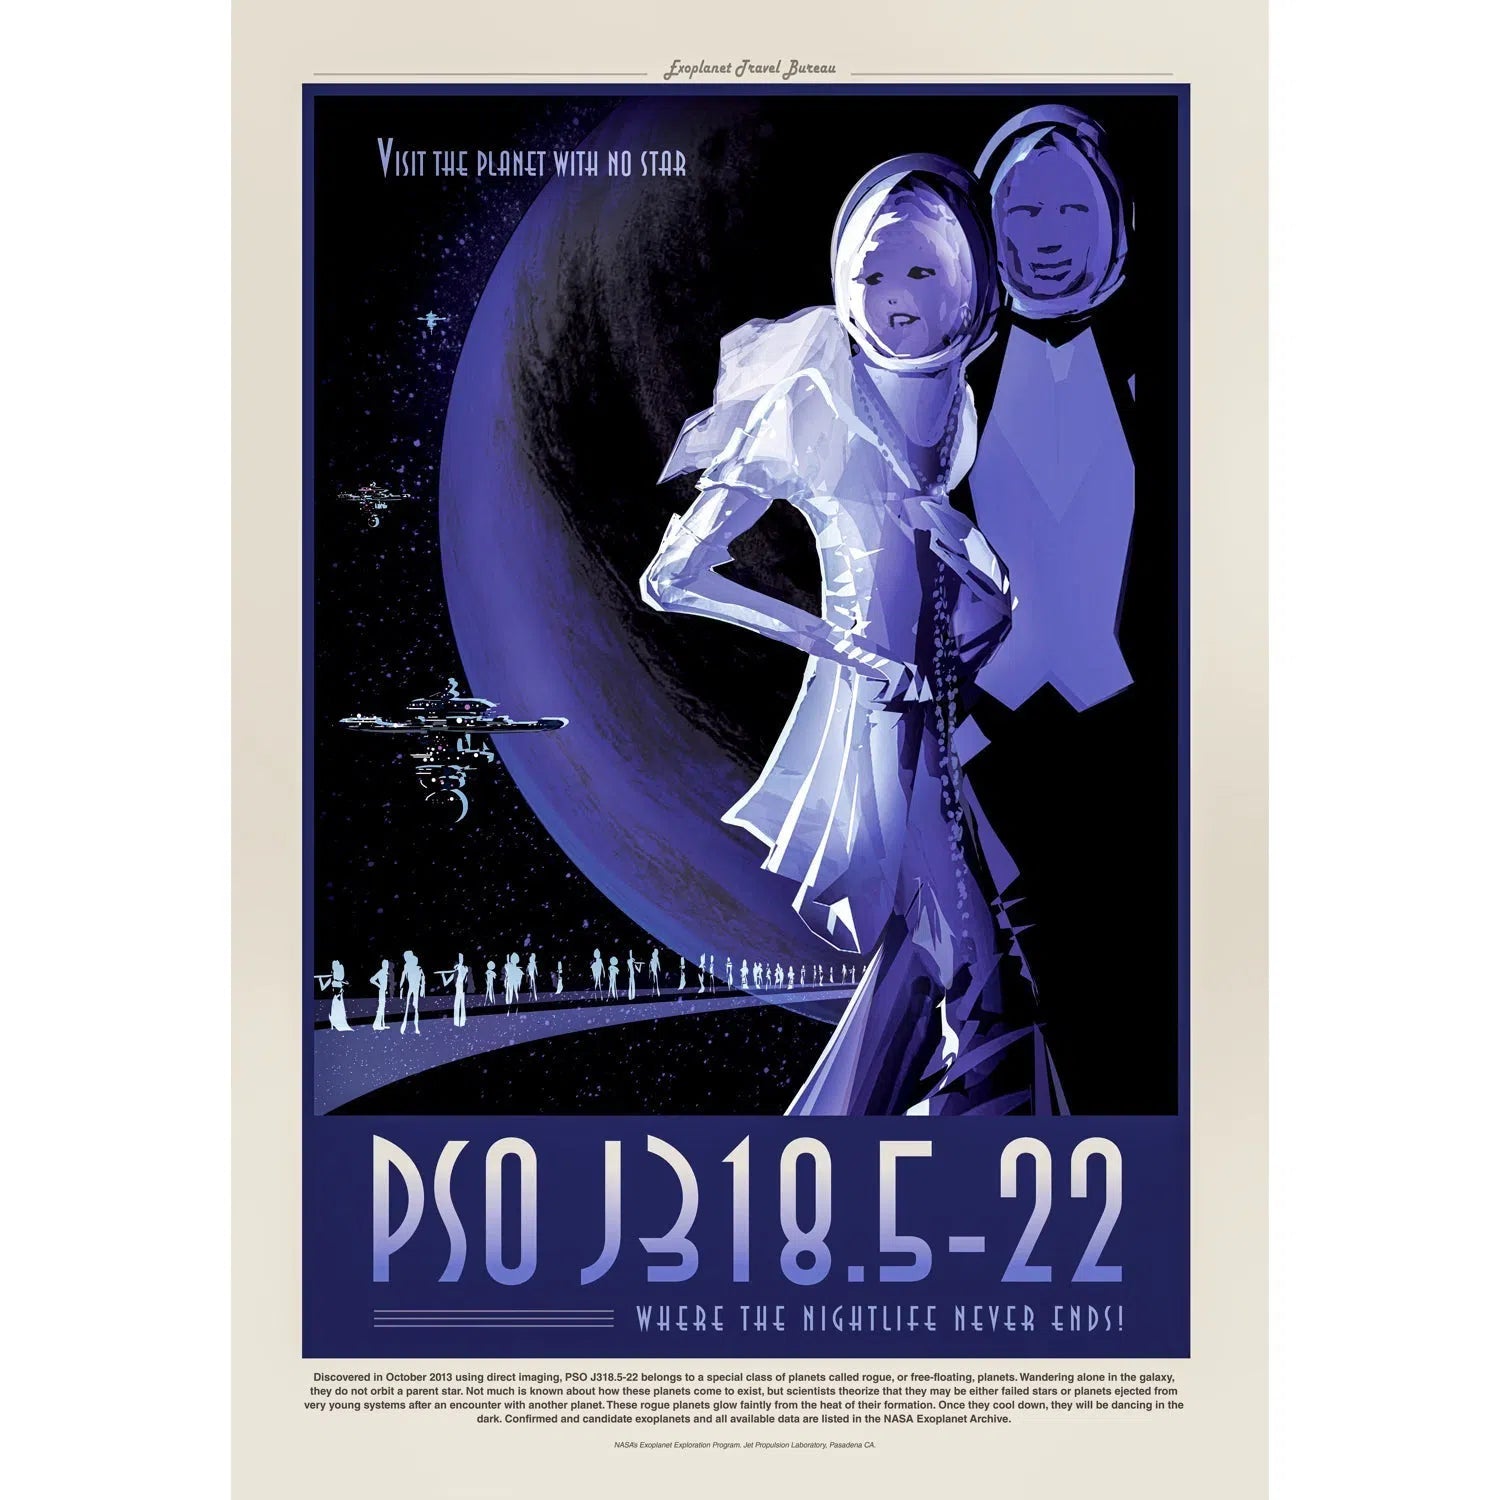 PSO J318.5-22 Where the nightlife never ends-Imagesdartistes